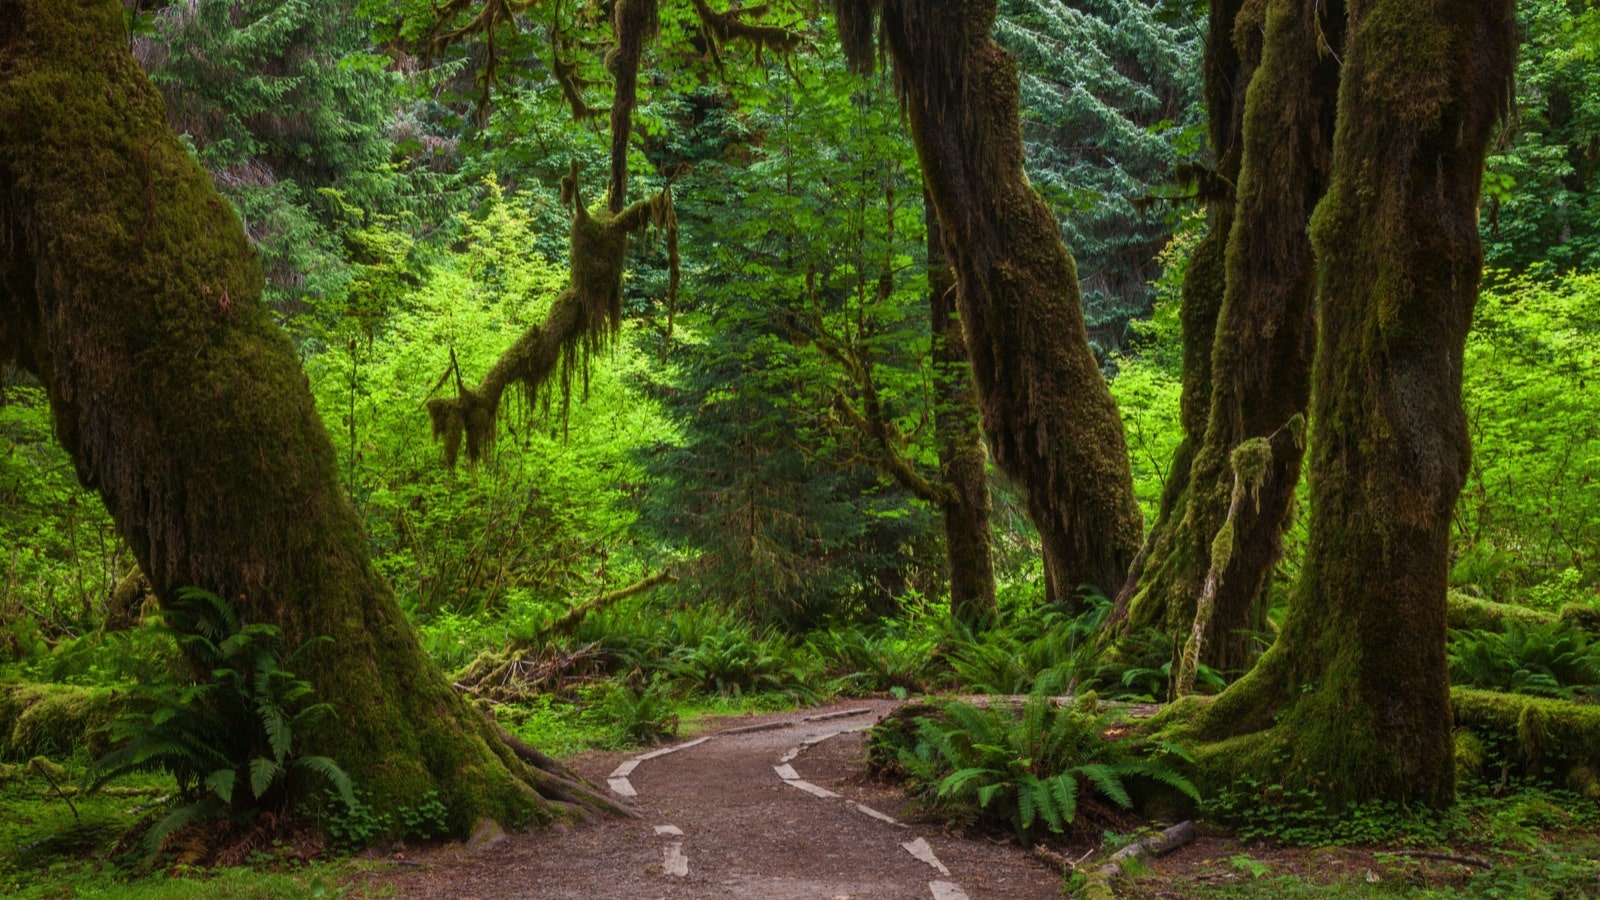 <p>The Olympic National Park protects the Hoh Rain Forest, one of the biggest temperate rainforests in the United States. Within its lush embrace are many plant and animal species that call it home, including Roosevelt elk, big leaf maple, salamanders, and the endangered Northern spotted owl.</p>